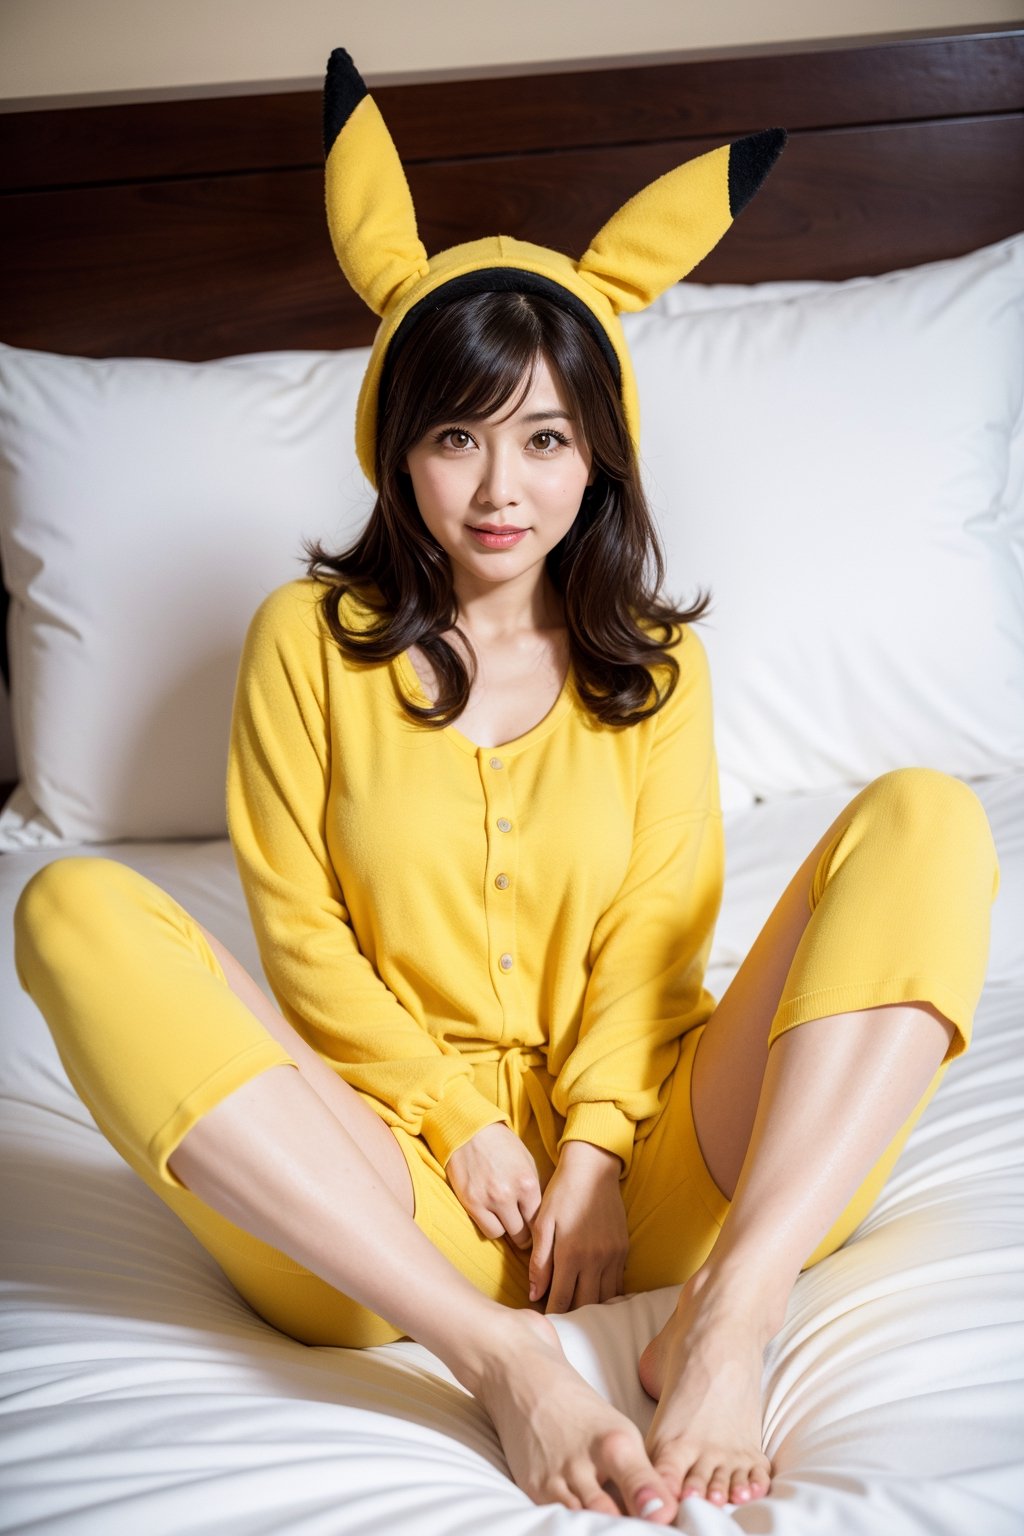 35 year old,mature woman,full body potrait,on bed,cosplay as pikachu,messy hair,spread leg wide